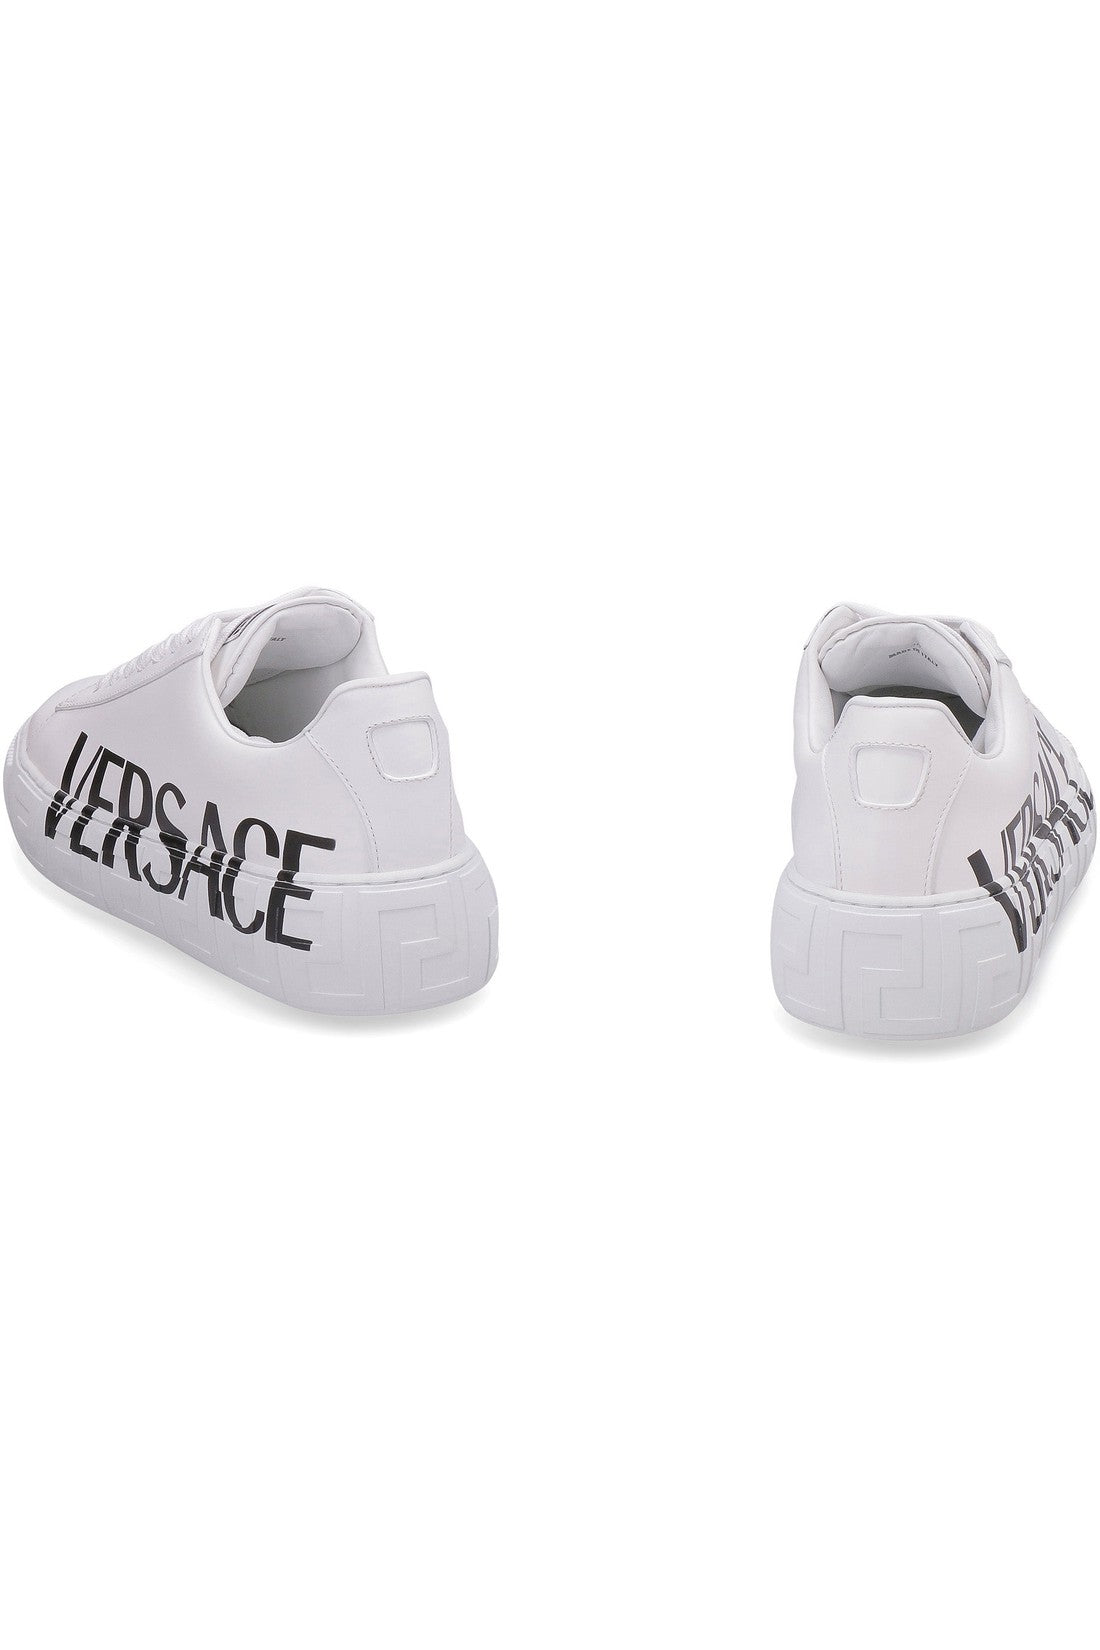 Versace-OUTLET-SALE-Greca leather low-top sneakers-ARCHIVIST